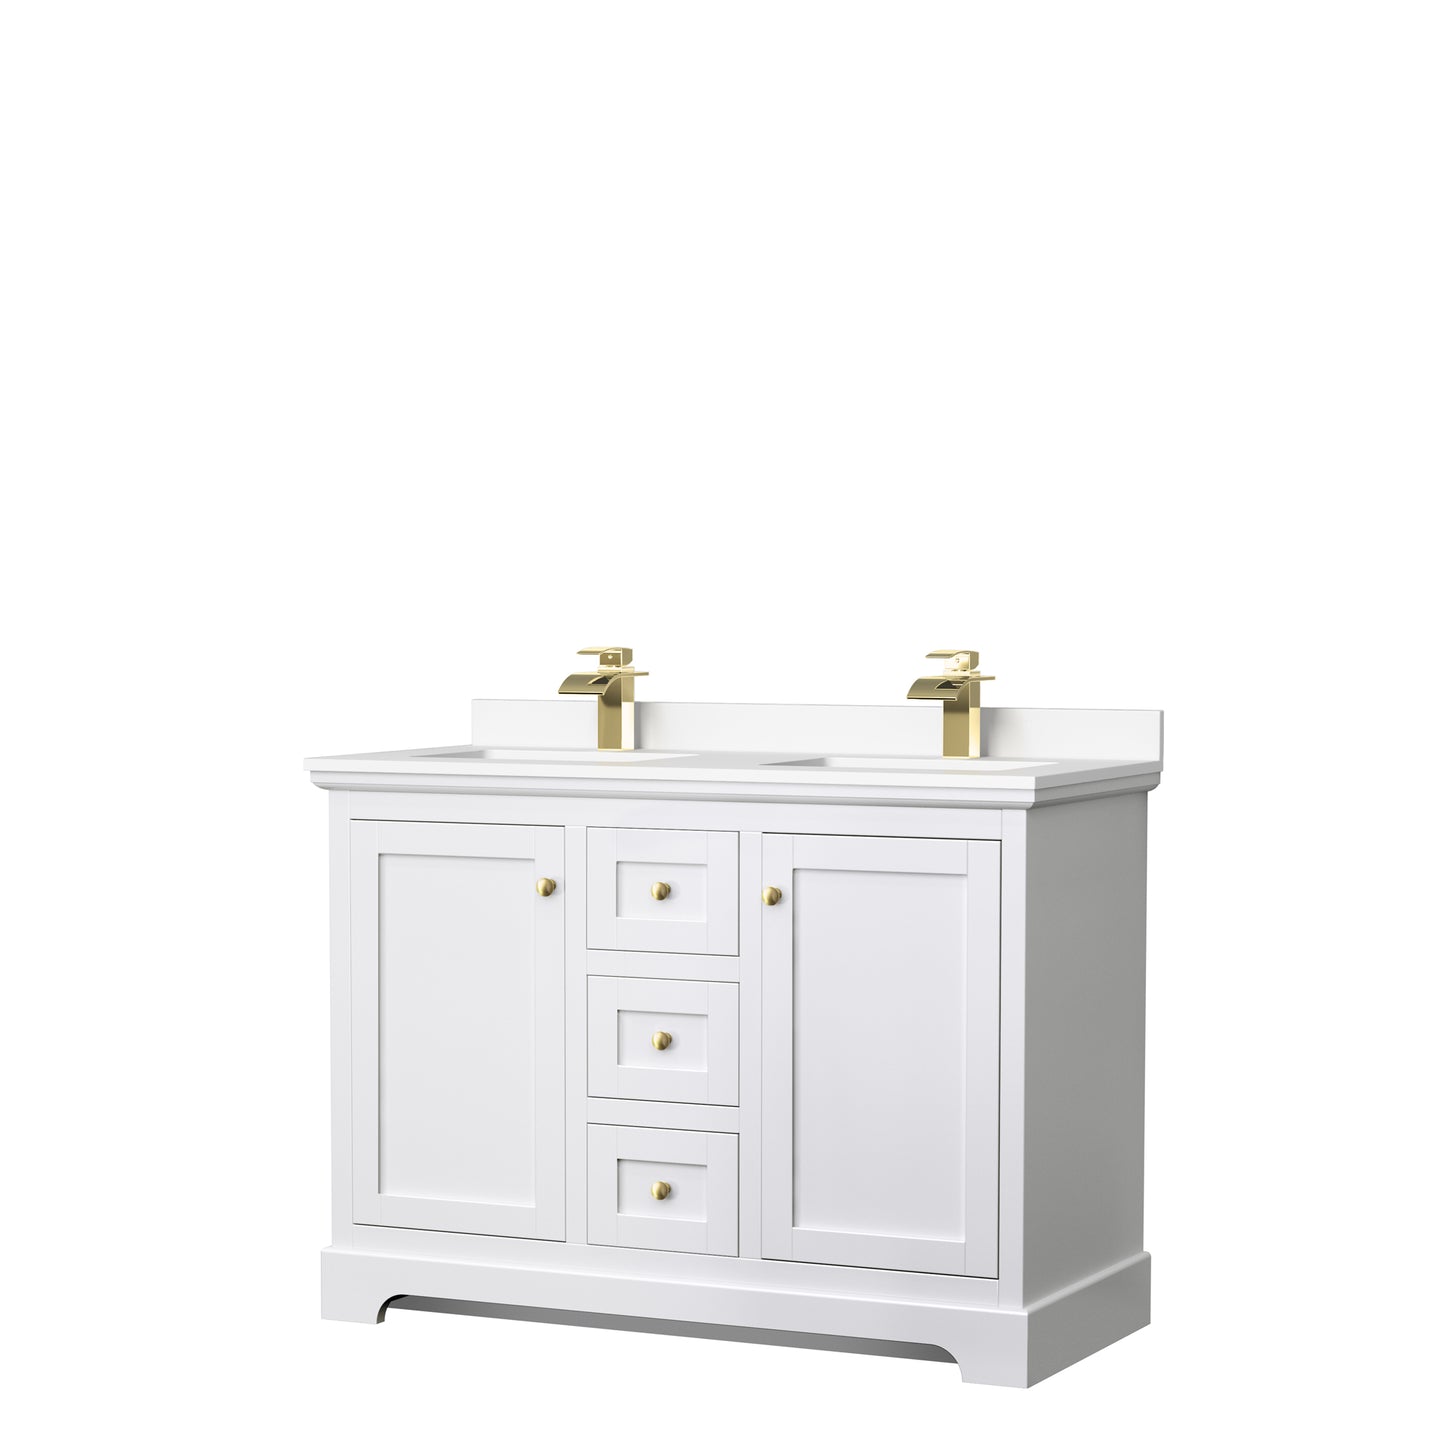 Wyndham Avery 48 Inch Double White Bathroom Vanity with Brushed Gold Trim Hardware - Luxe Bathroom Vanities